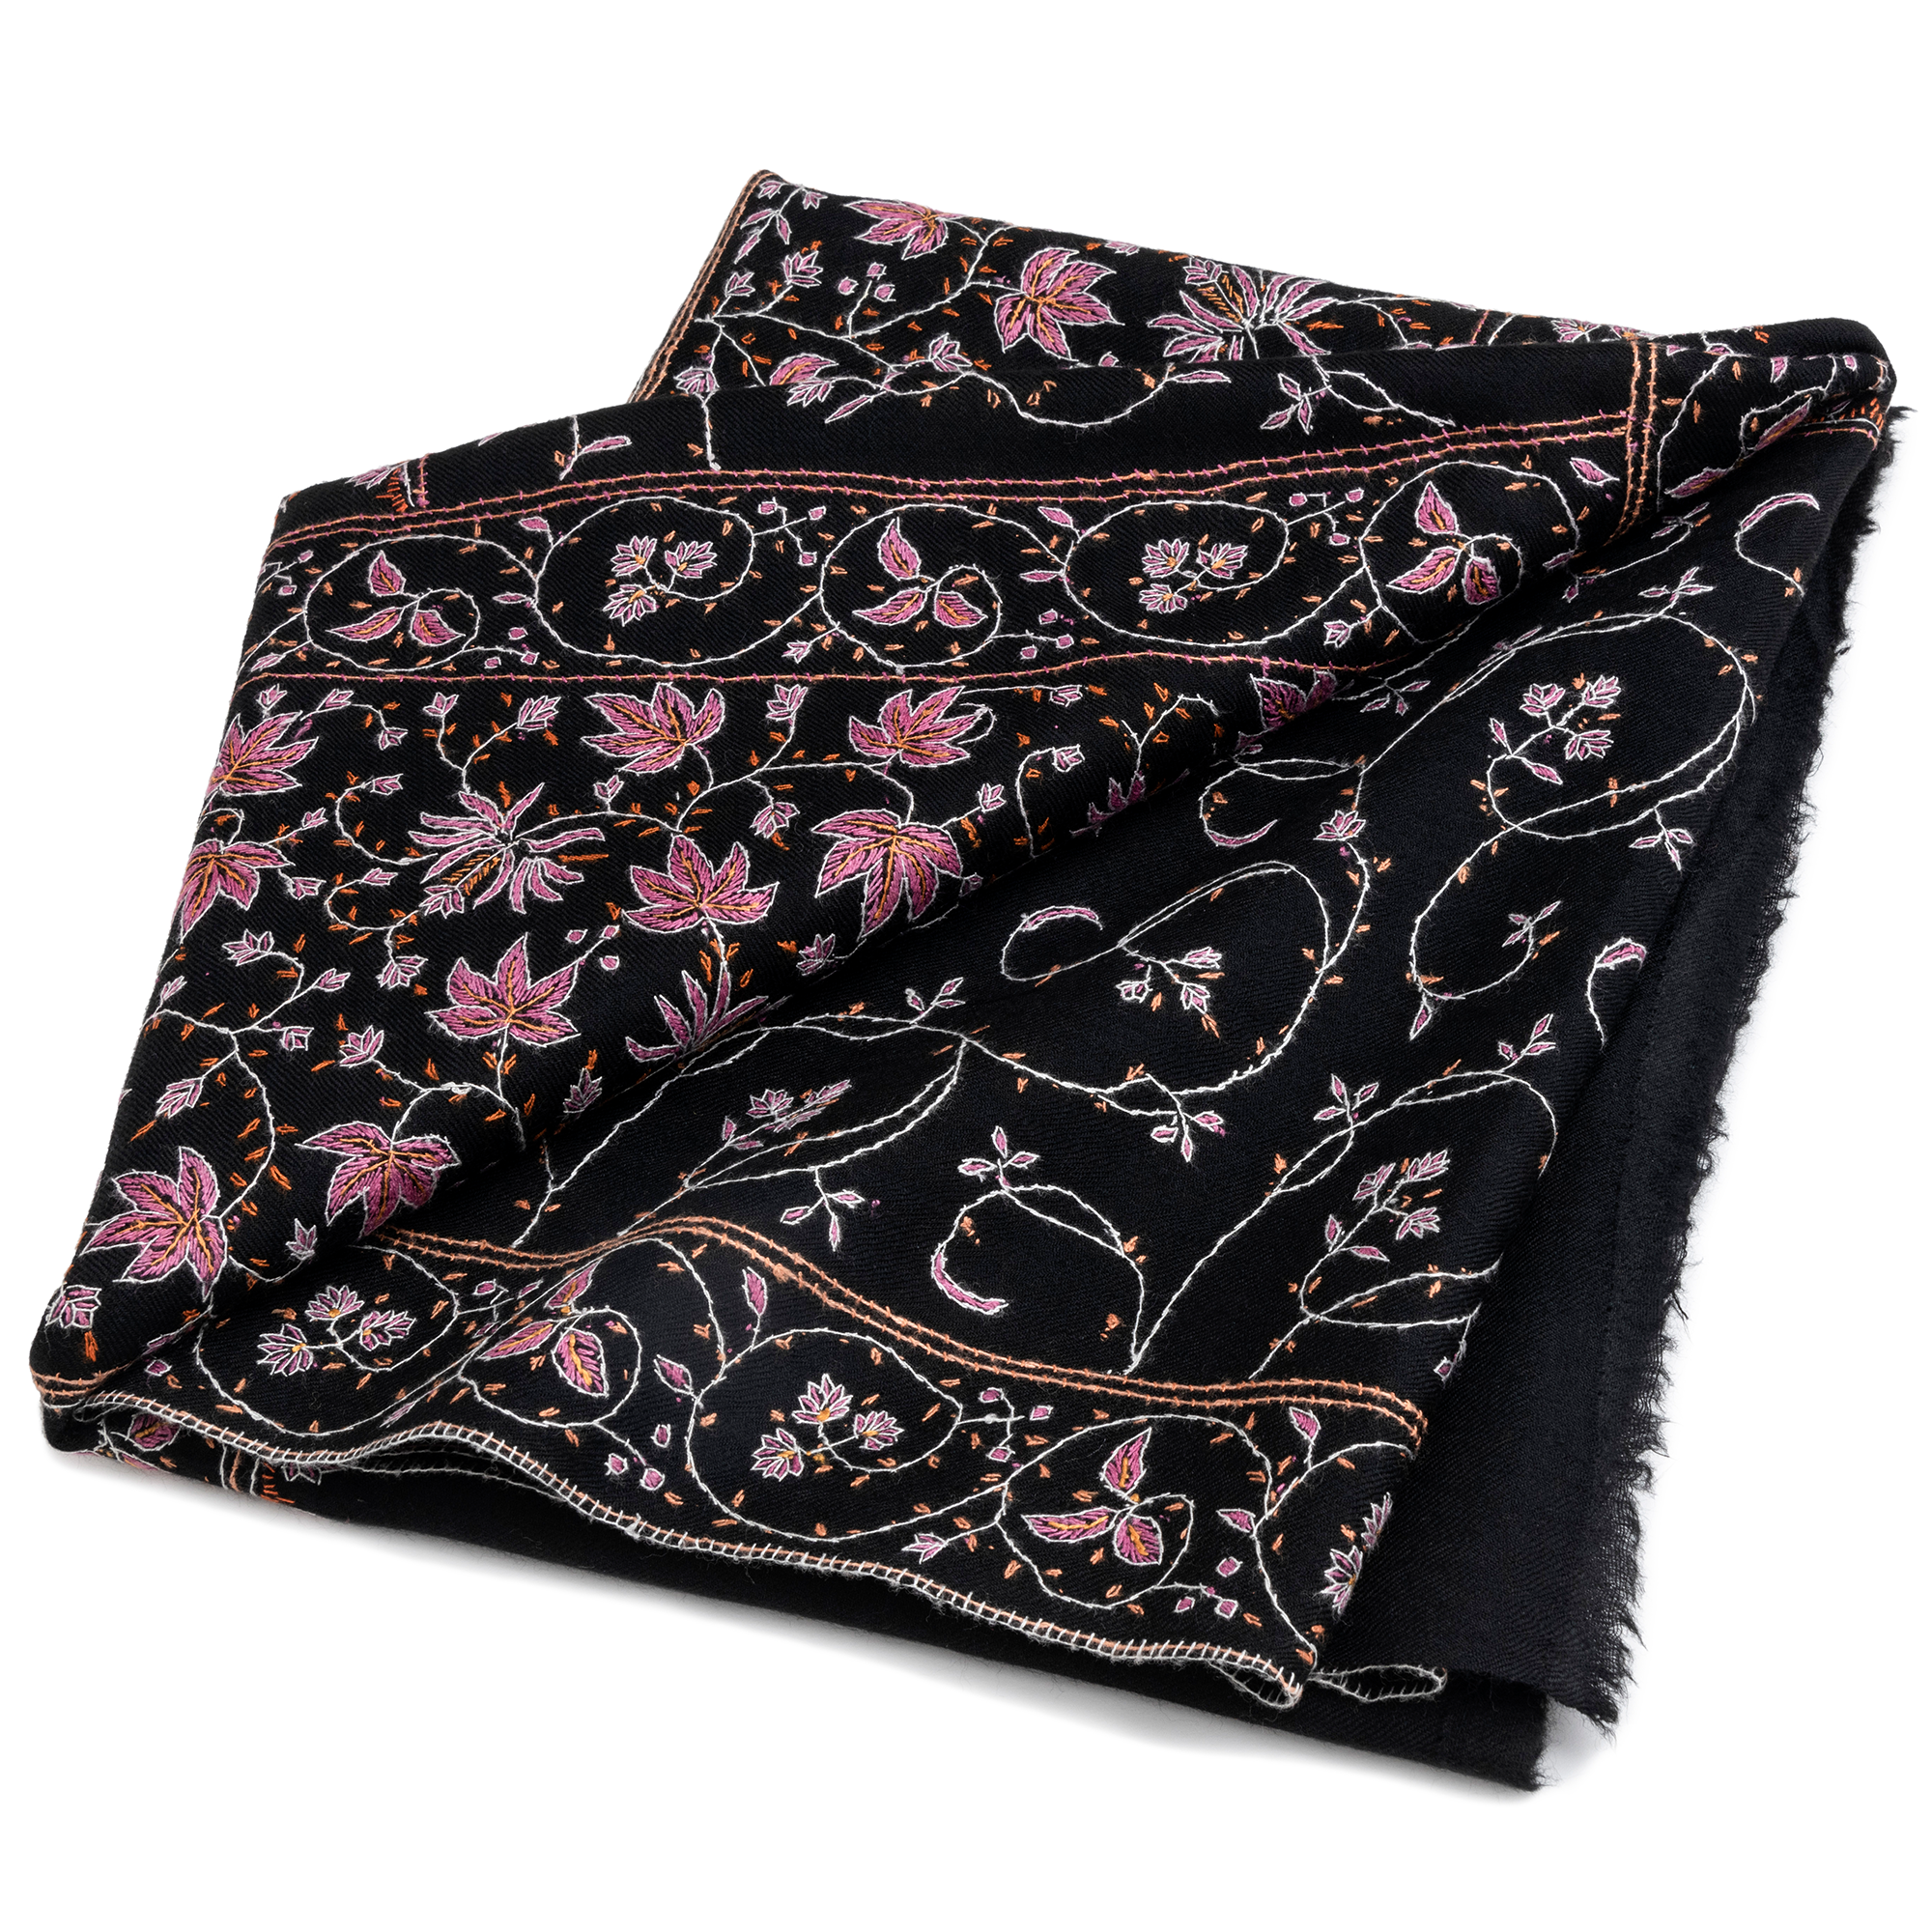 Introducing Our Luxurious 100% Handmade Pashmina Collection